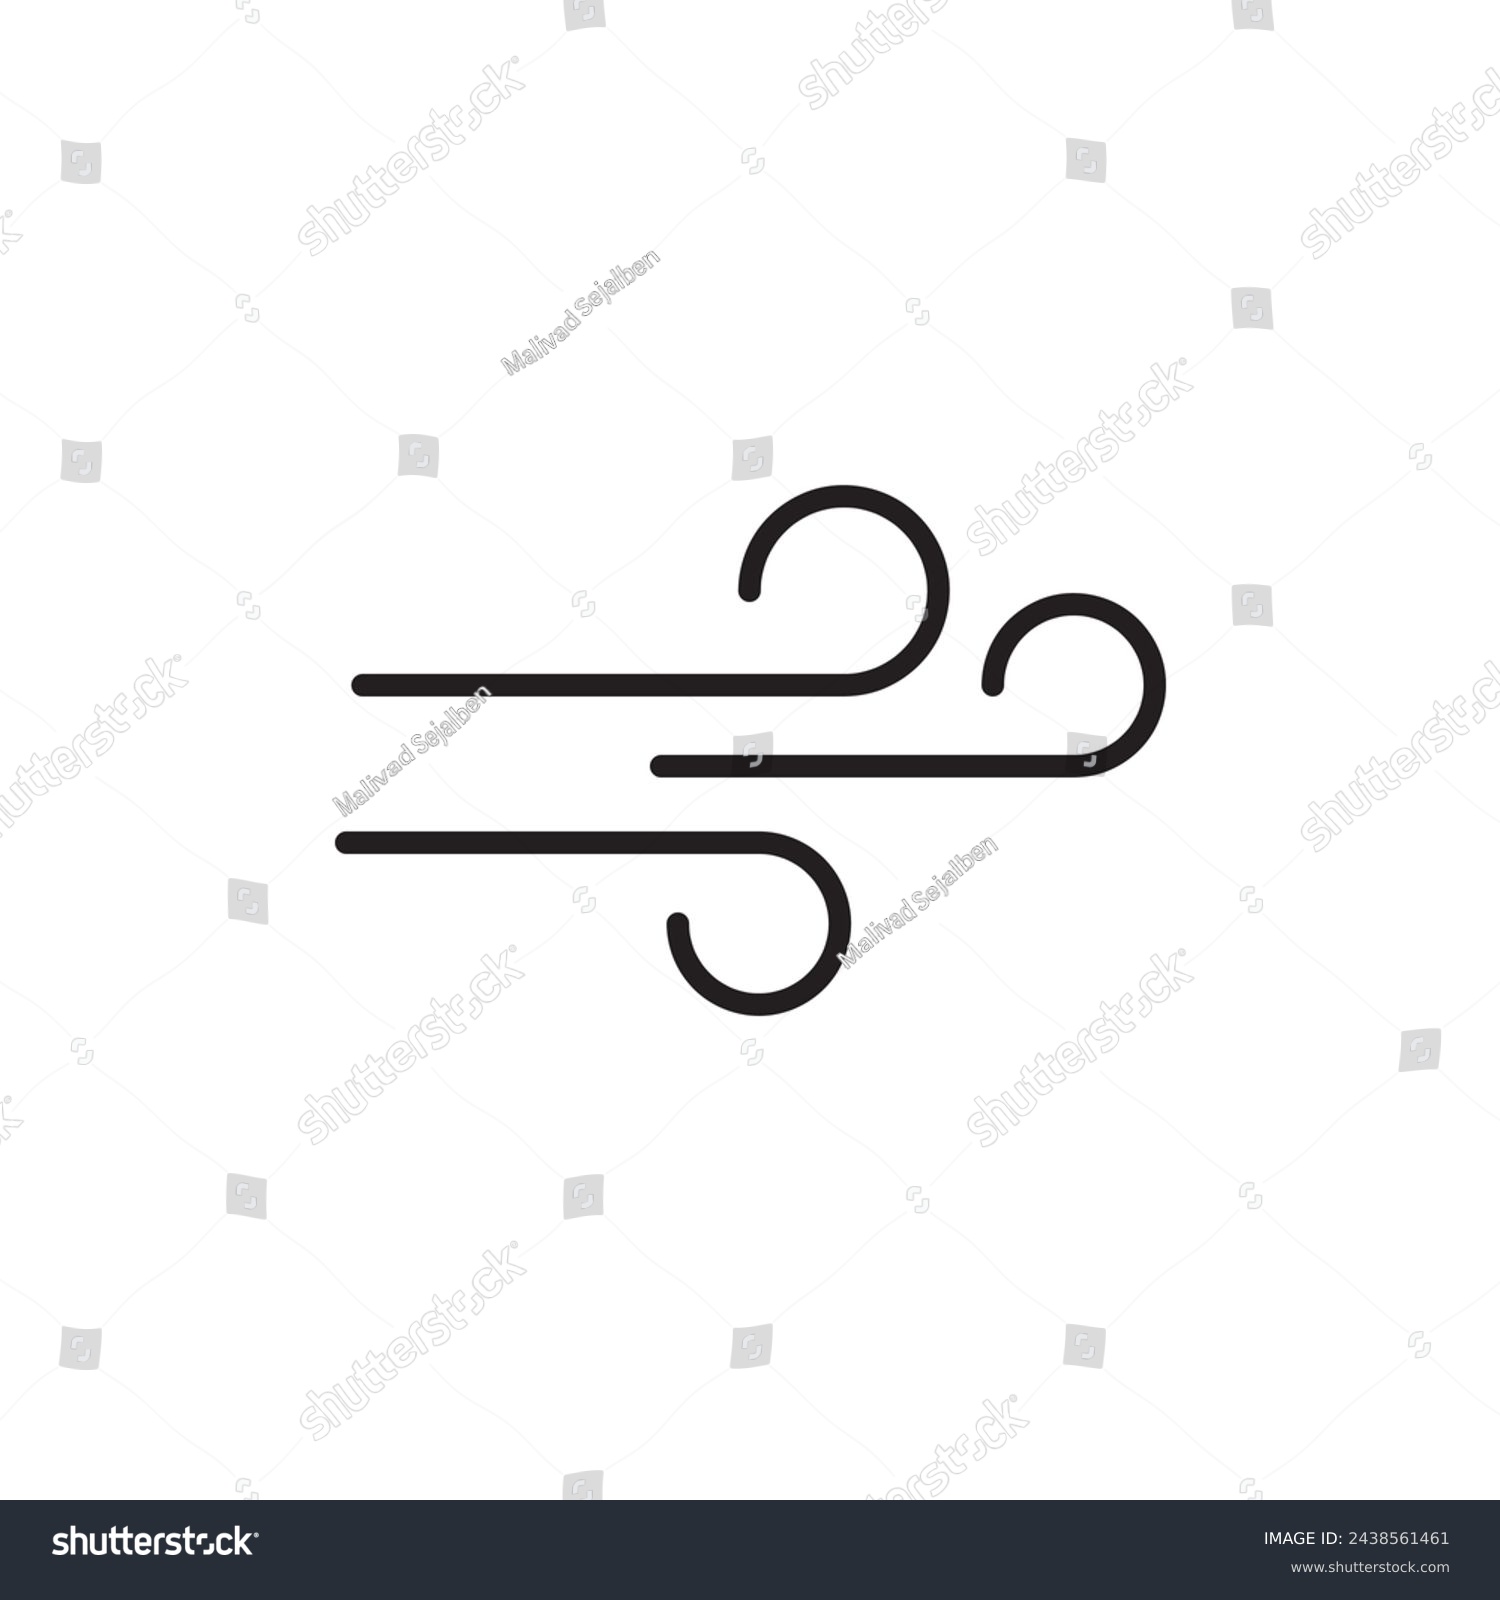 SVG of Wind icon simple flat trendy style vector illustration on white background..eps
 svg